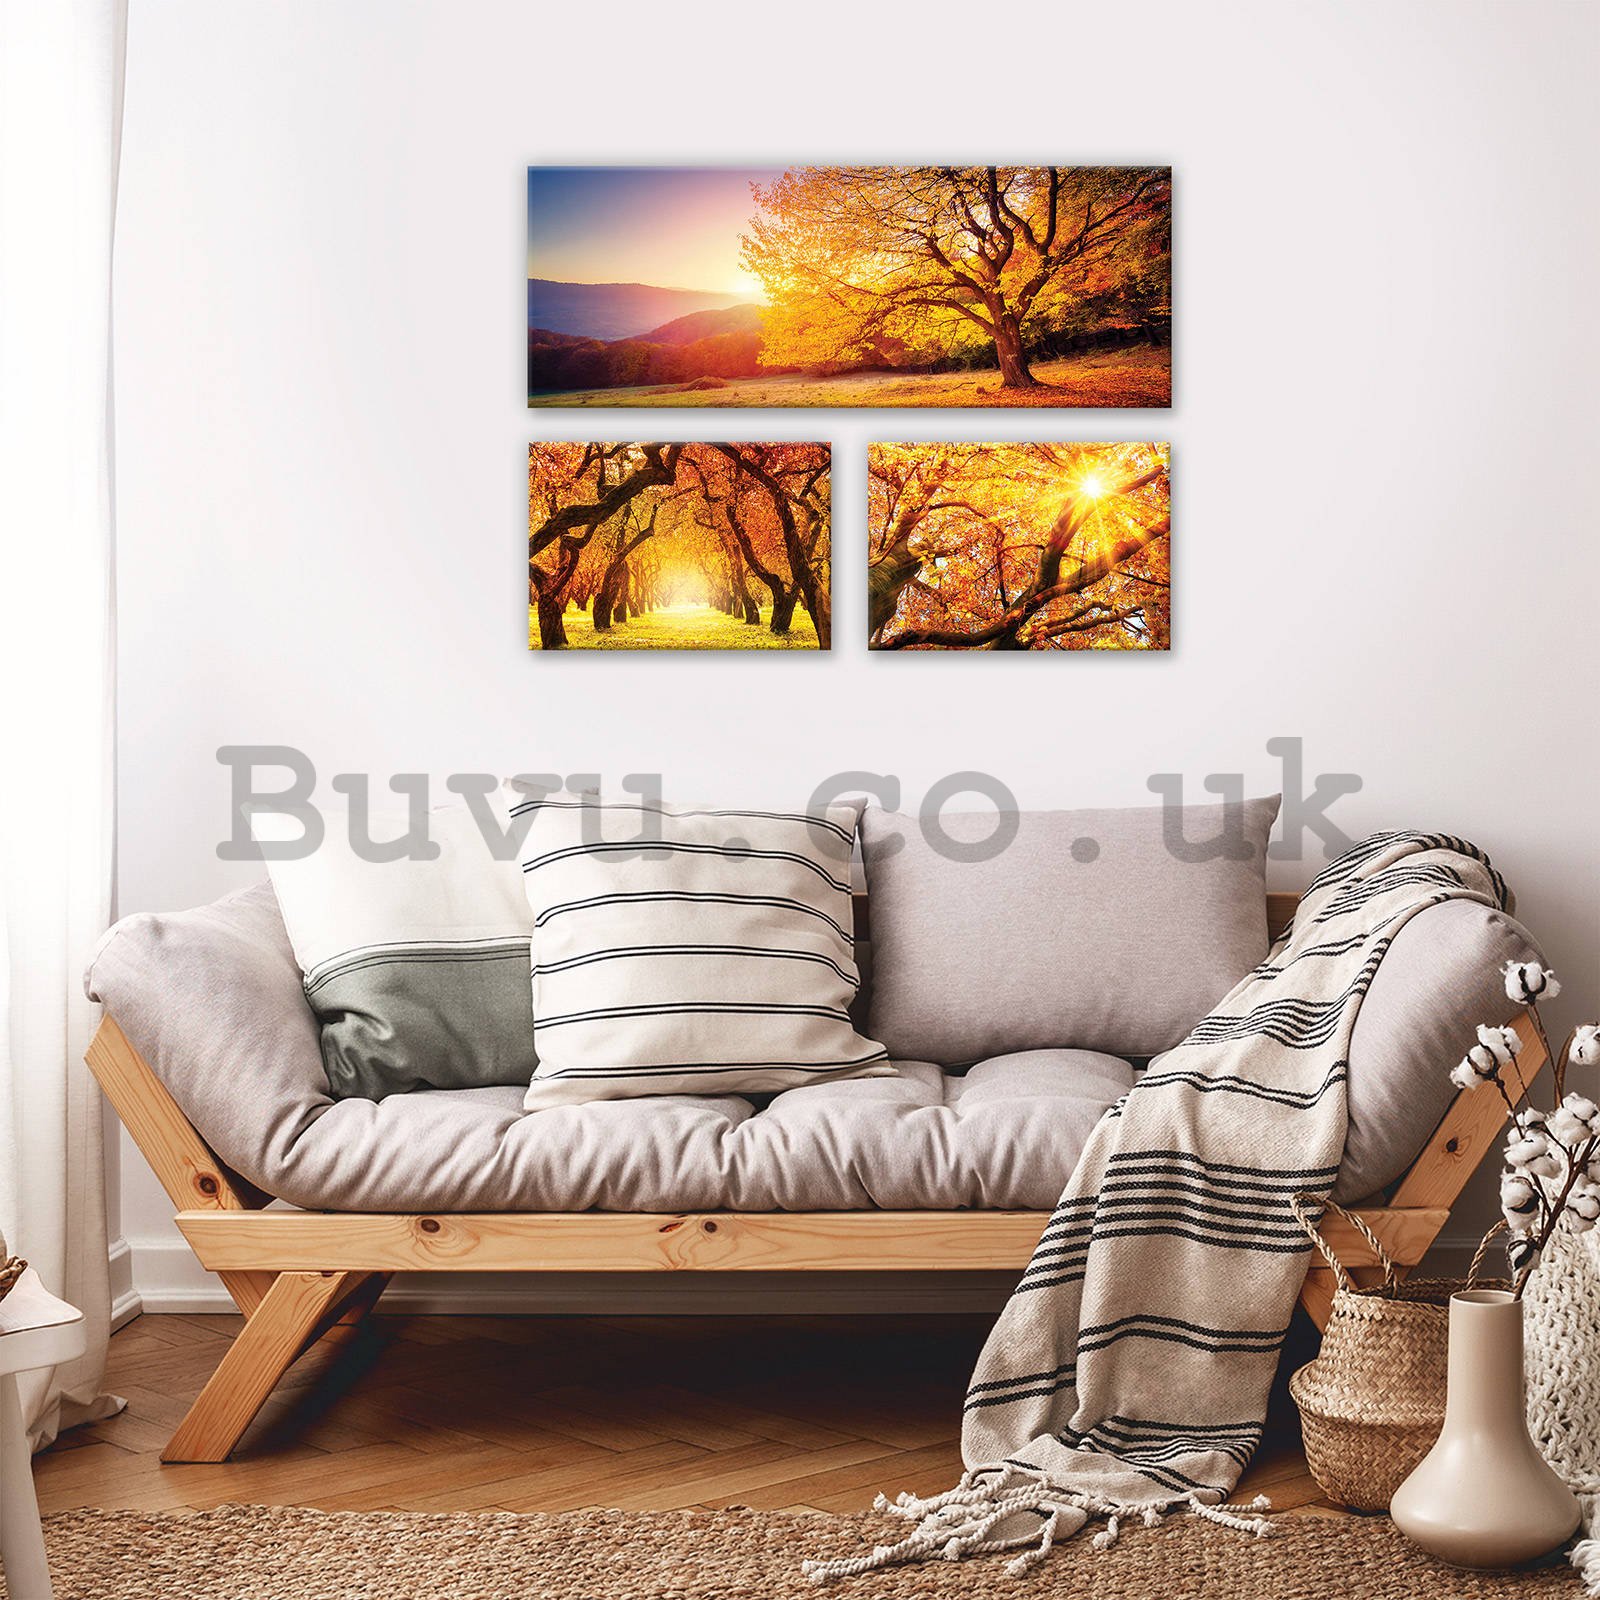 Painting on canvas: Autumn trees - set 1pc 80x30 cm and 2pc 37,5x24,8 cm